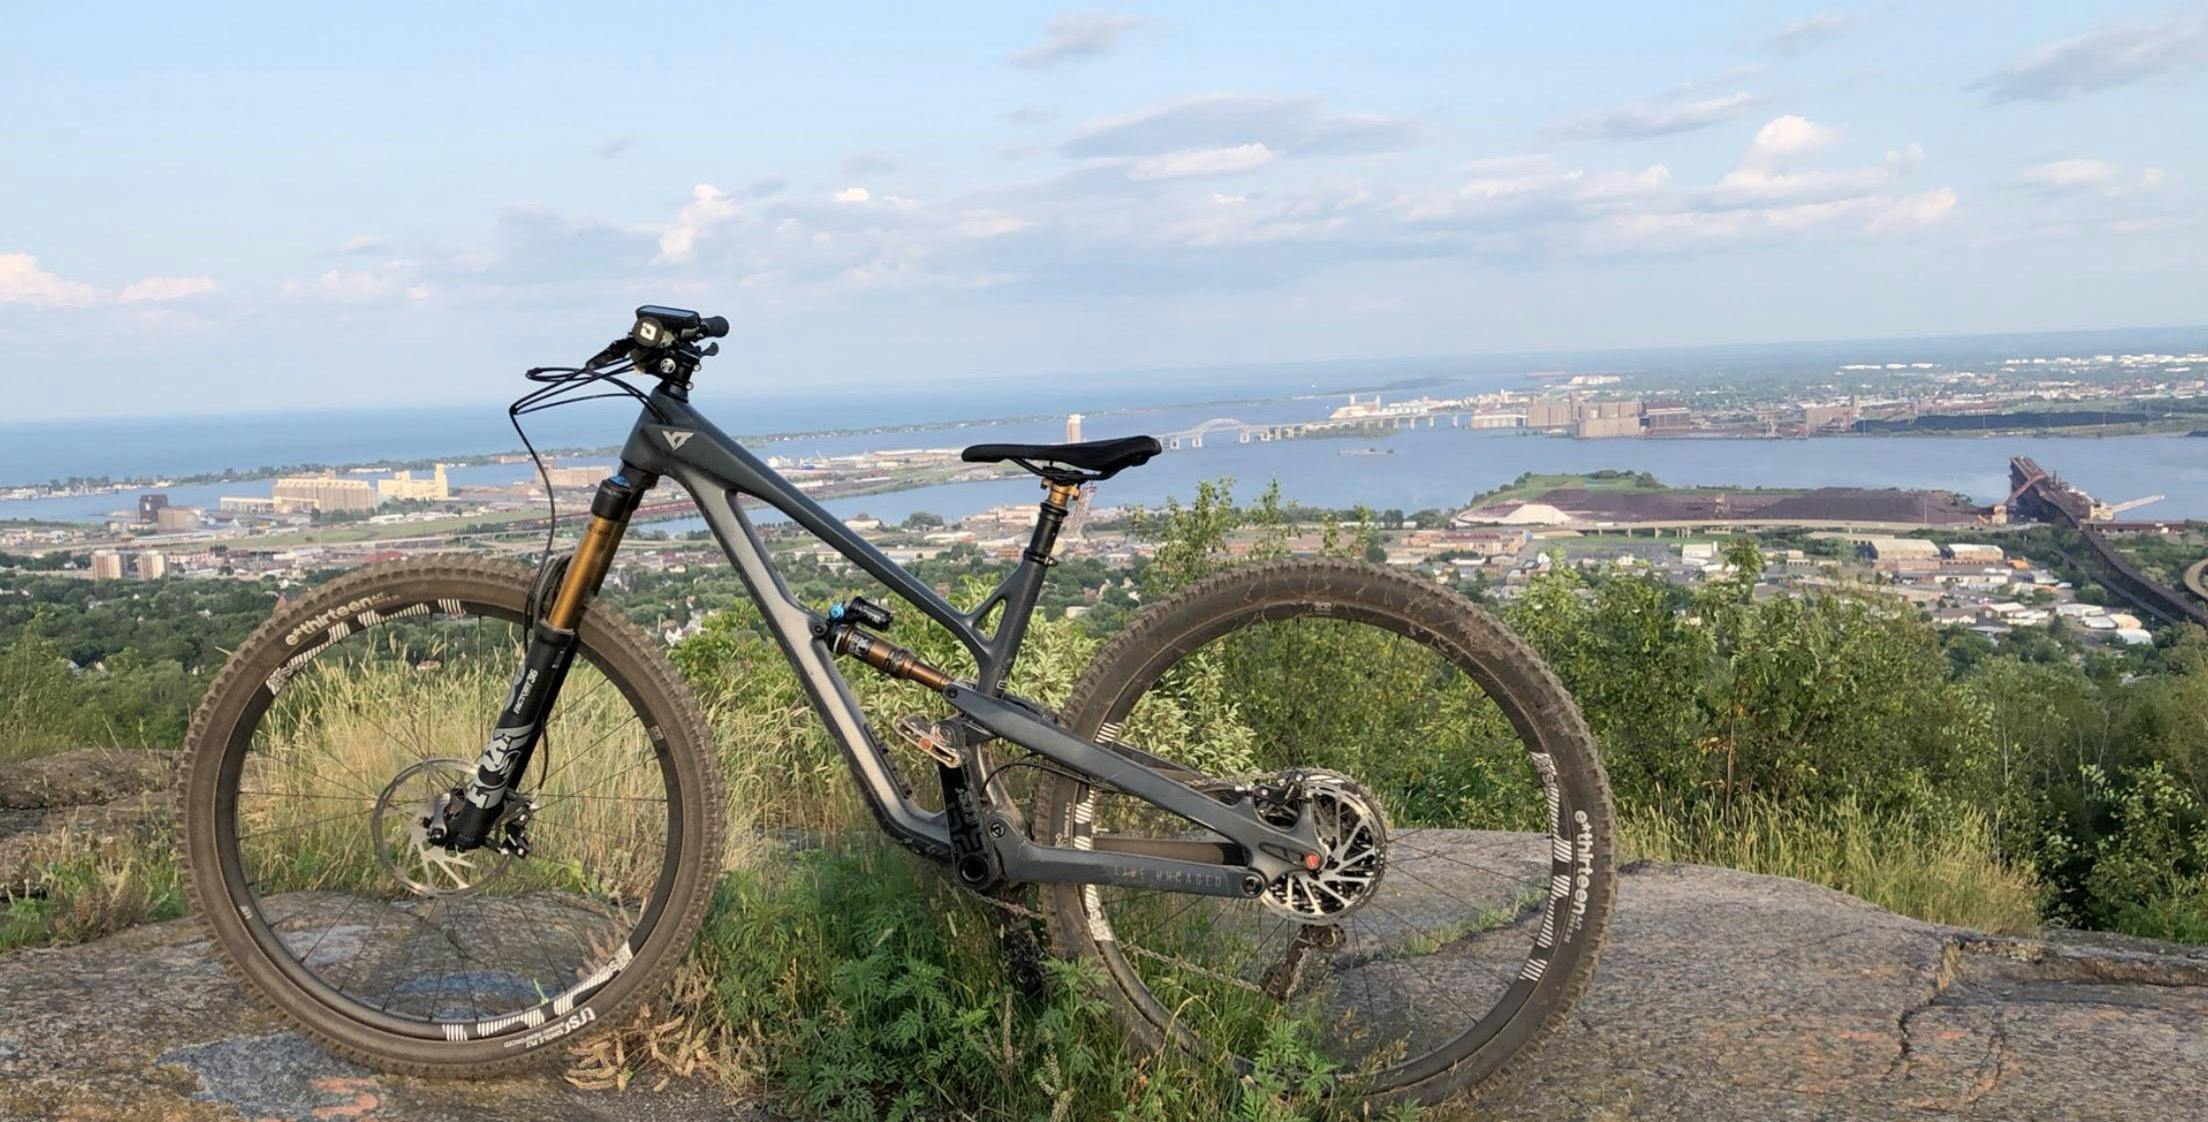 A Pro Race bike sits at an overlook with a body of water and trees in the background.